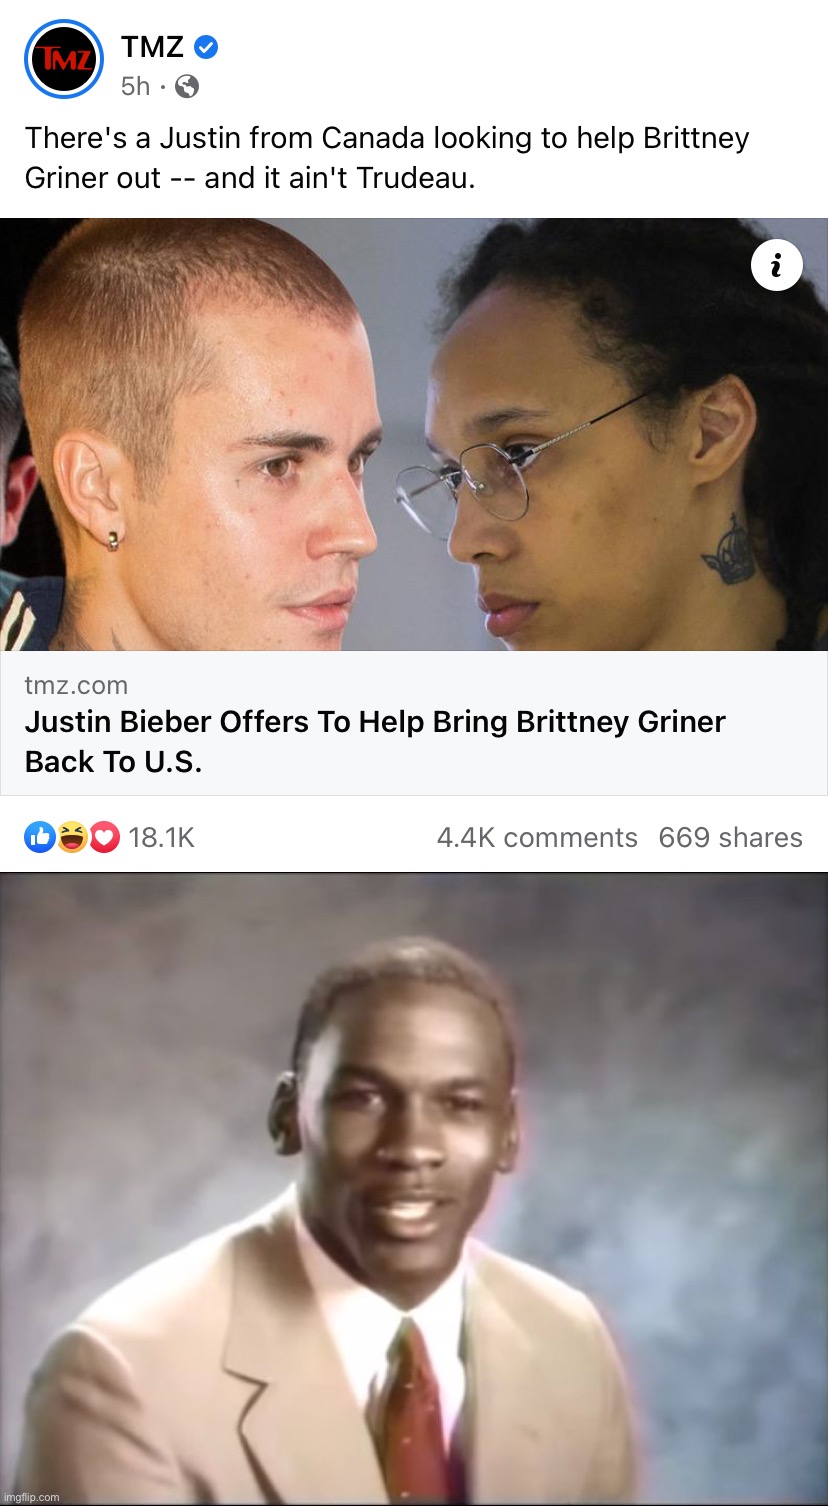 Stop it, get some real diplomatic help | image tagged in justin bieber brittney griner,stop it get some help | made w/ Imgflip meme maker